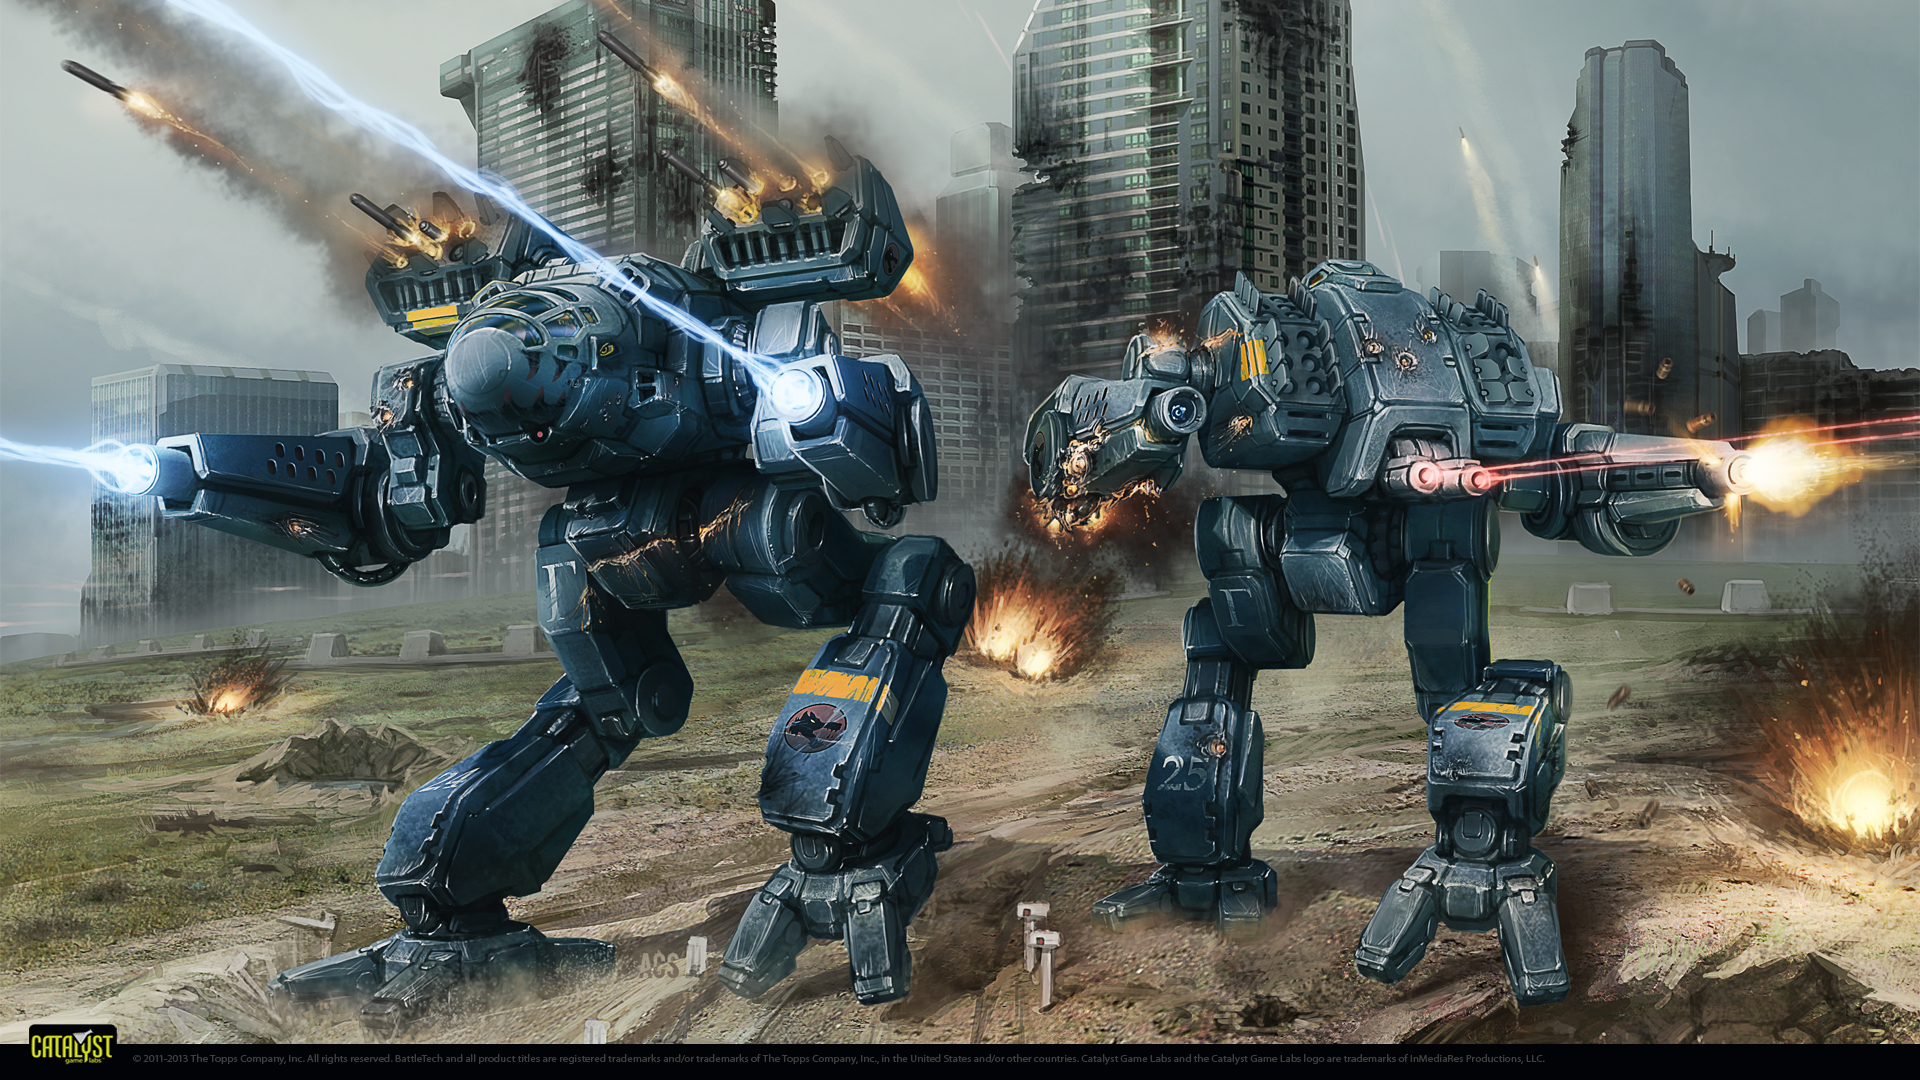 Battletech HD Wallpaper That Need To Be Your New Background